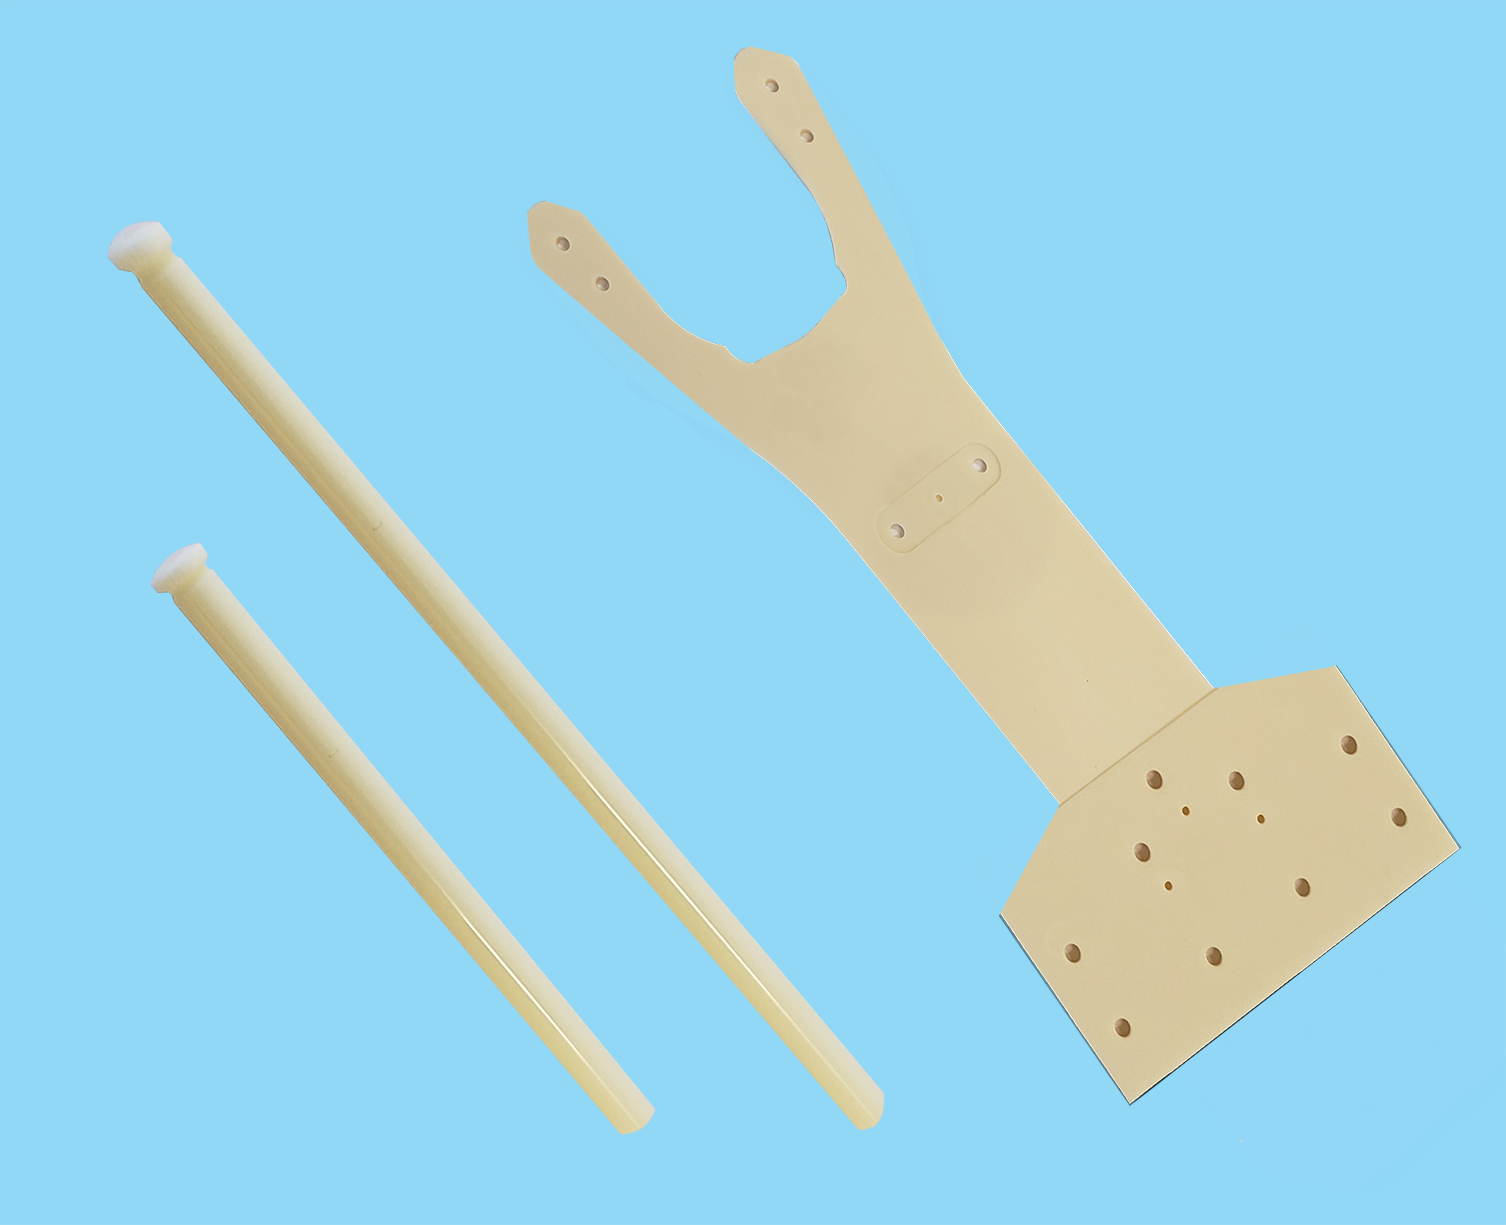 Structural Ceramic Pins